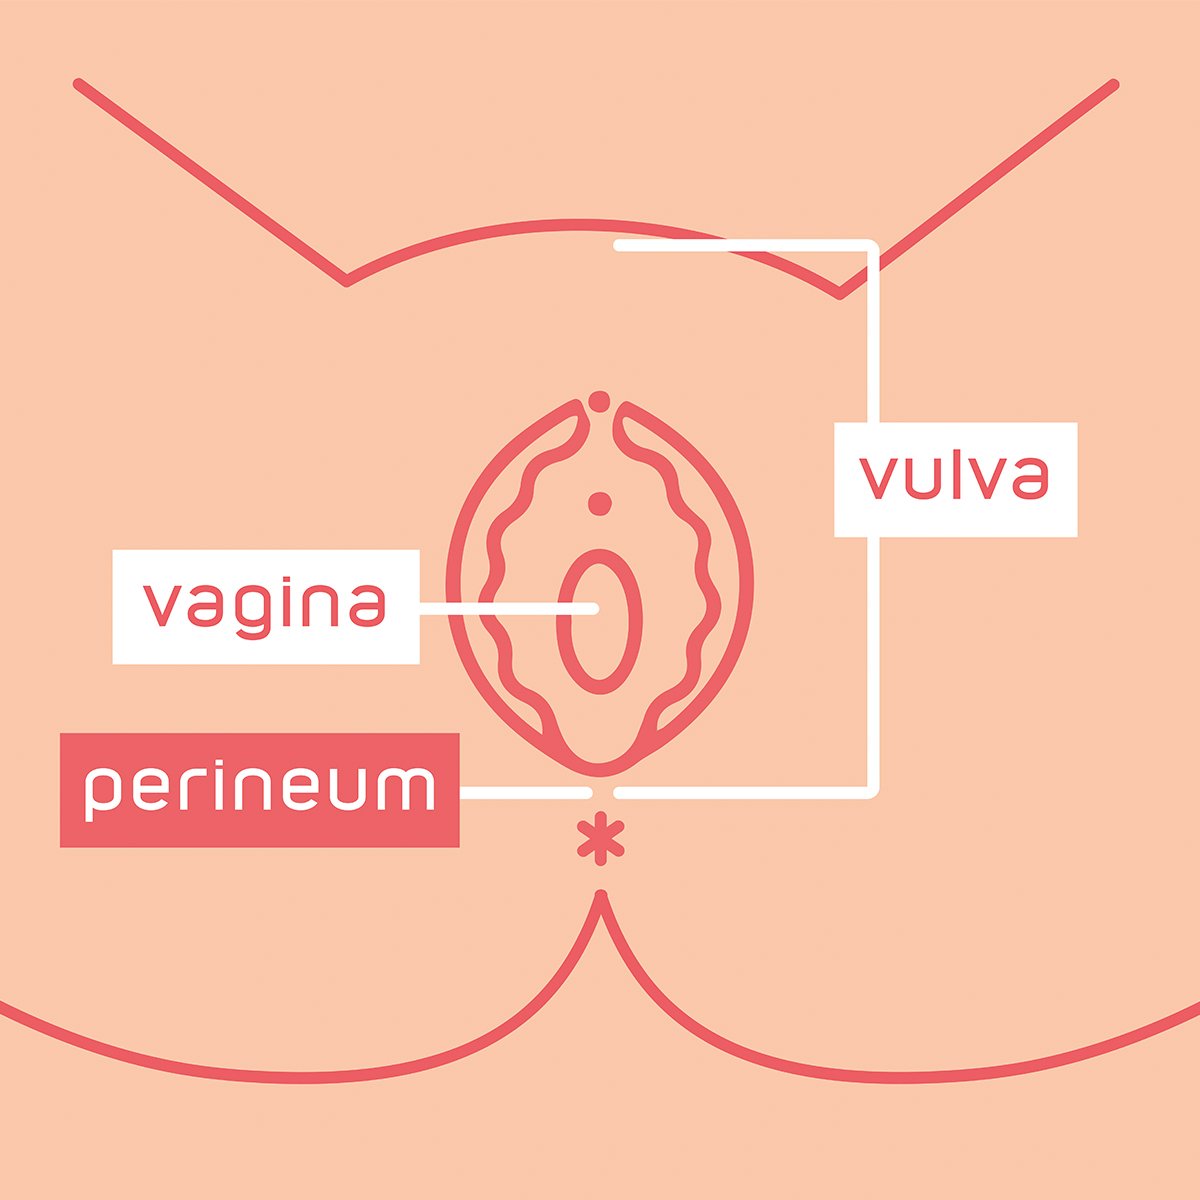 How To Do Perineal Massage To Prevent Perineum Tearing – My Midwife